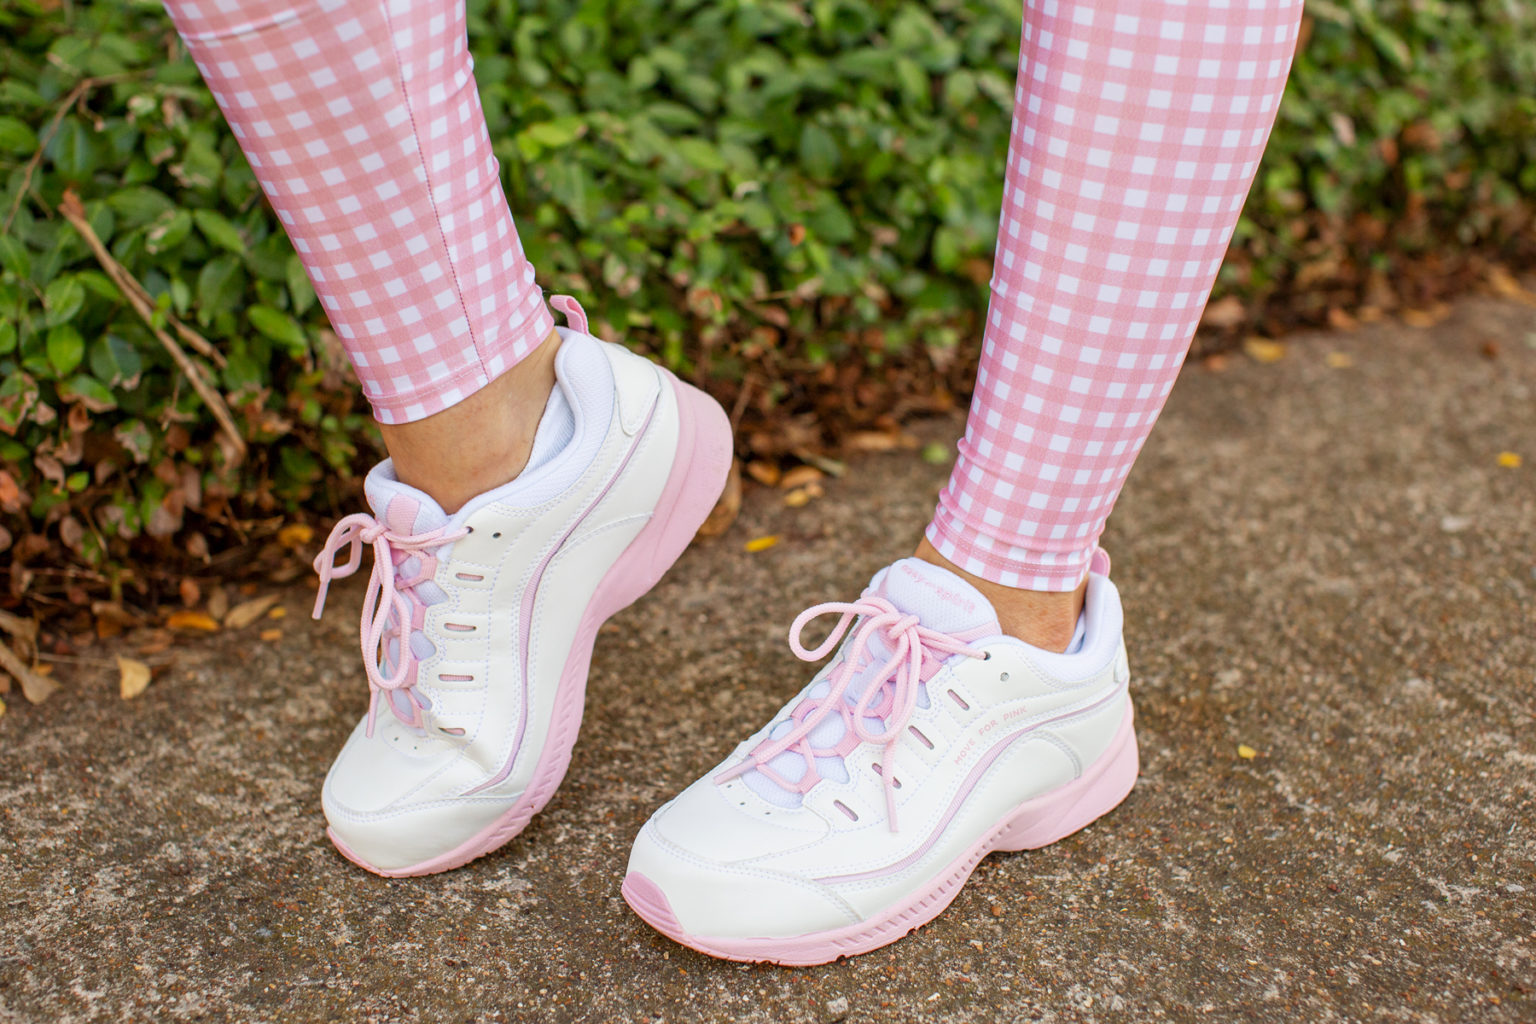 womans feet in pink and white easy spirit tennis shoes